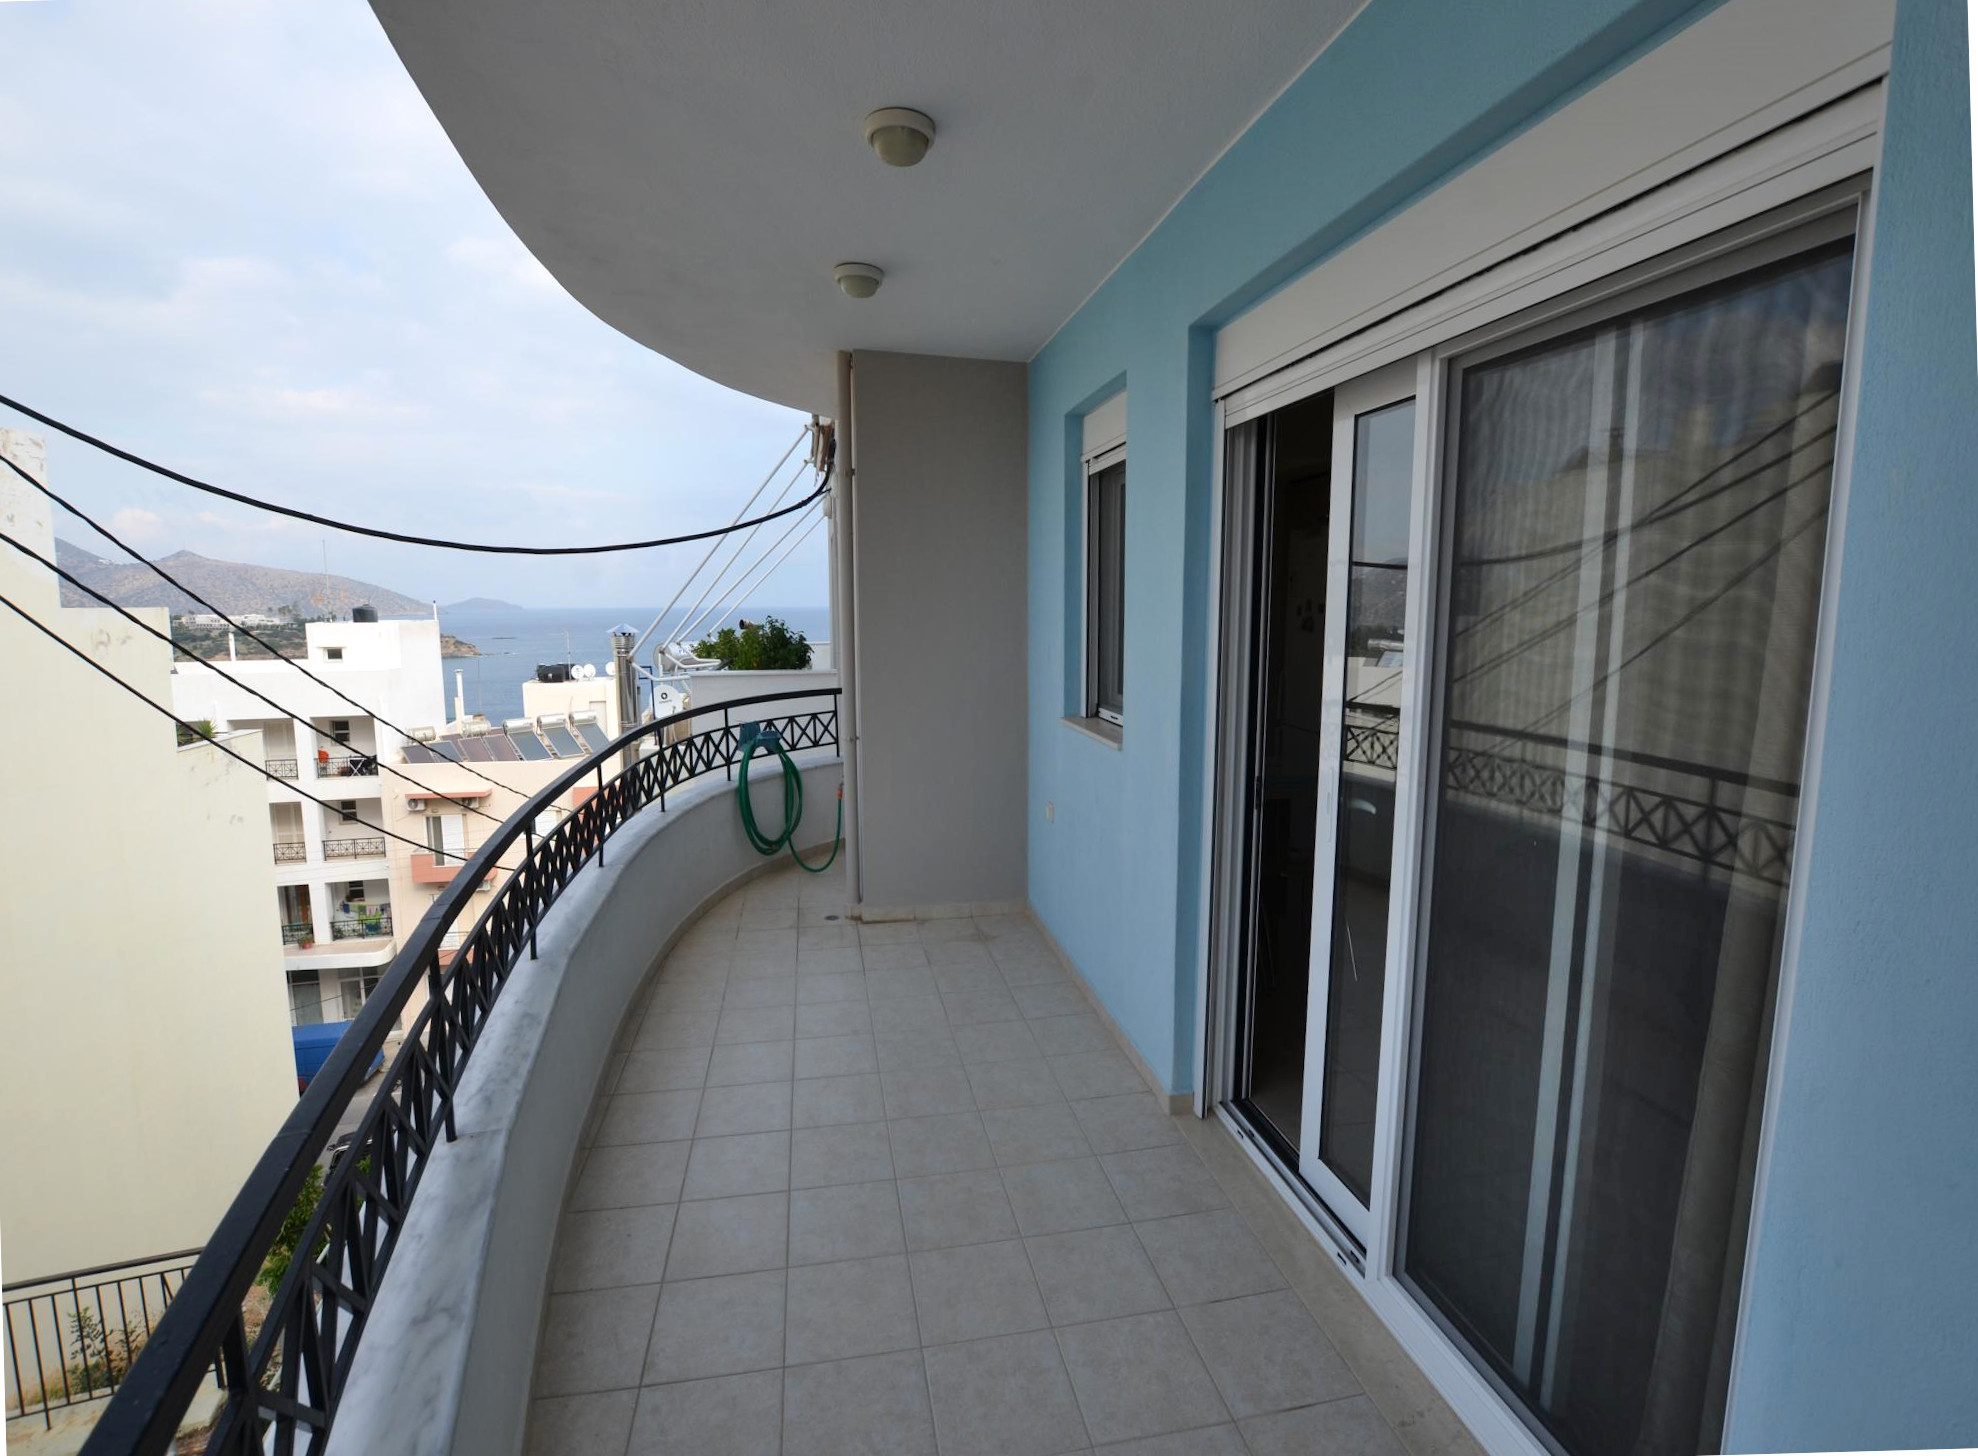 3 Bedroom Modern apartment with sea views.